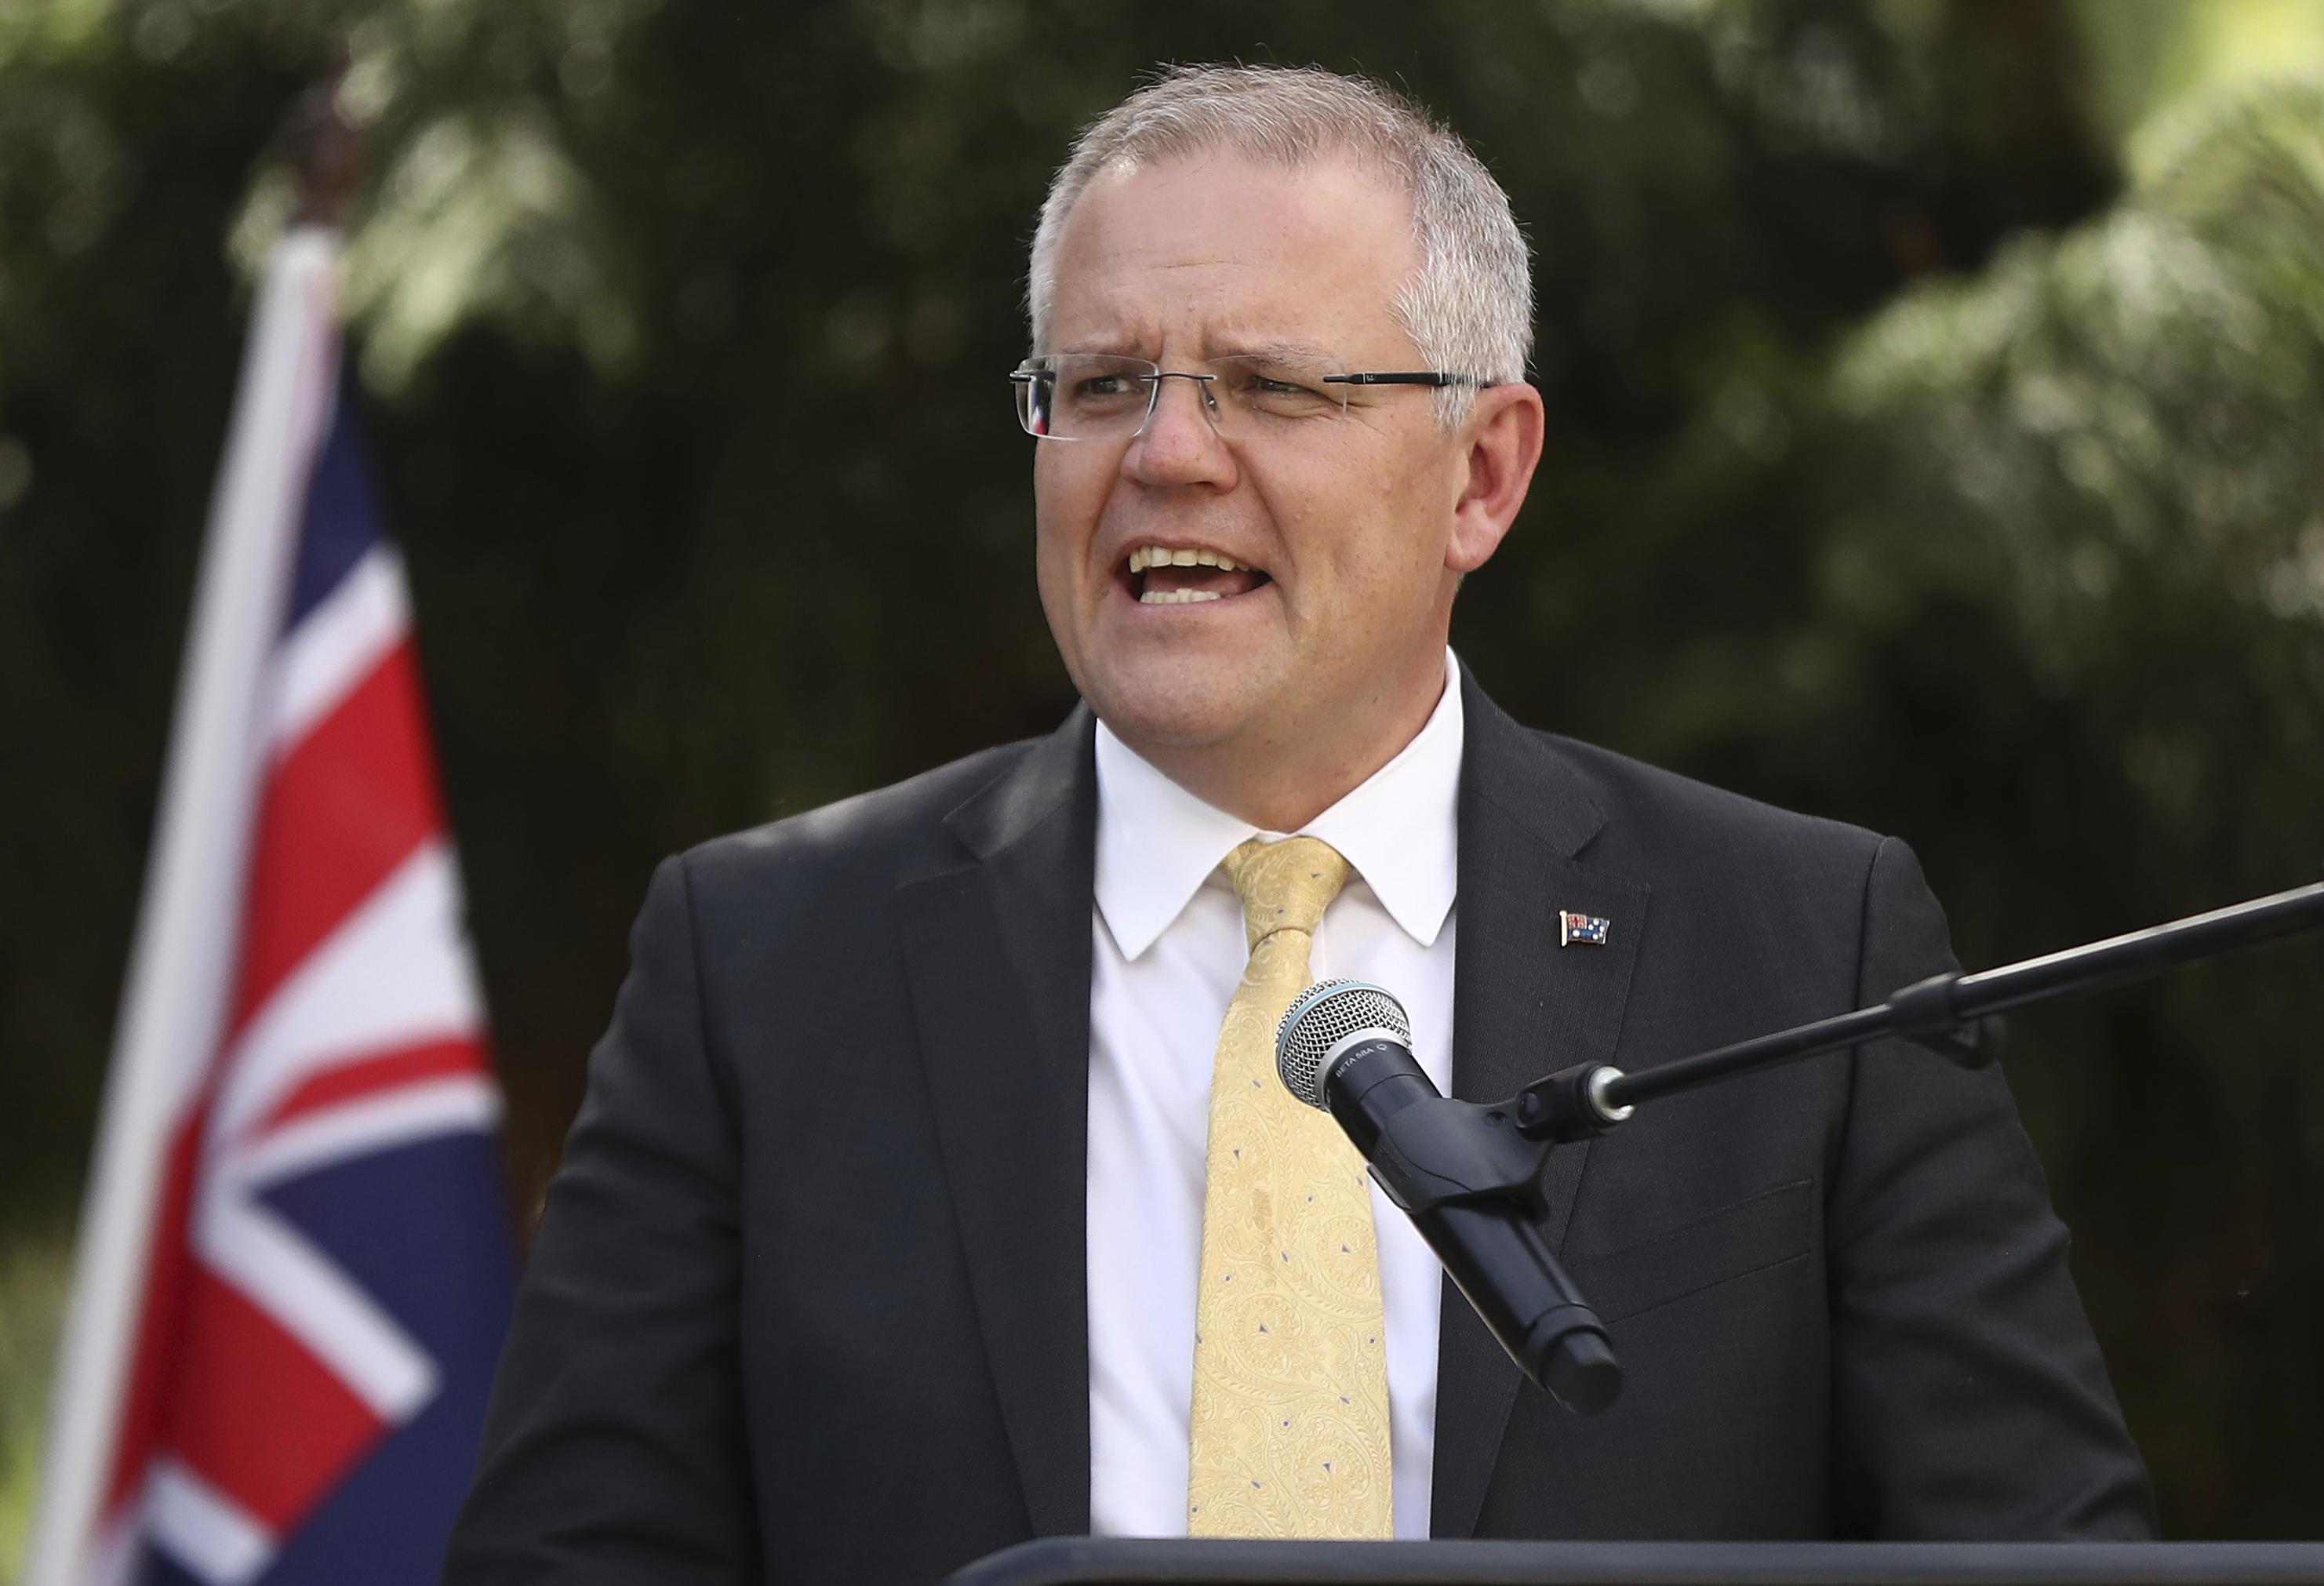 Morrison Calls Resurfaced Report He Made Anti-Muslim Comments “Disgraceful”